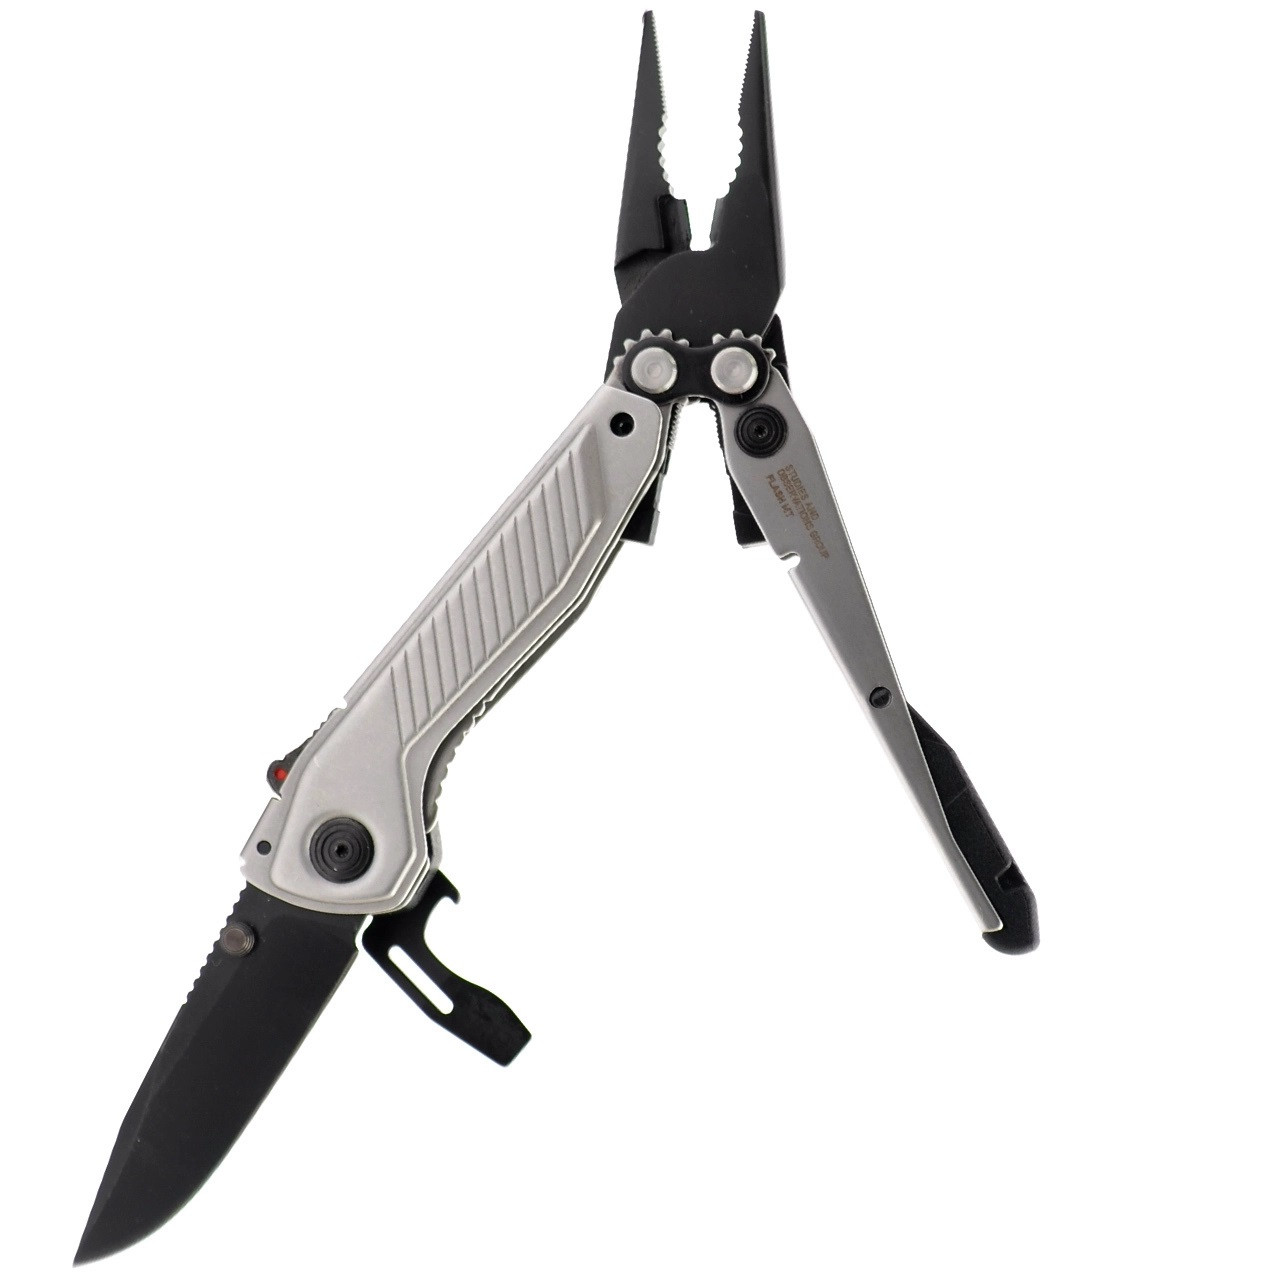 product image for SOG Flash MT Silver Multi-Tool with Black Handle and D2 Steel Blade